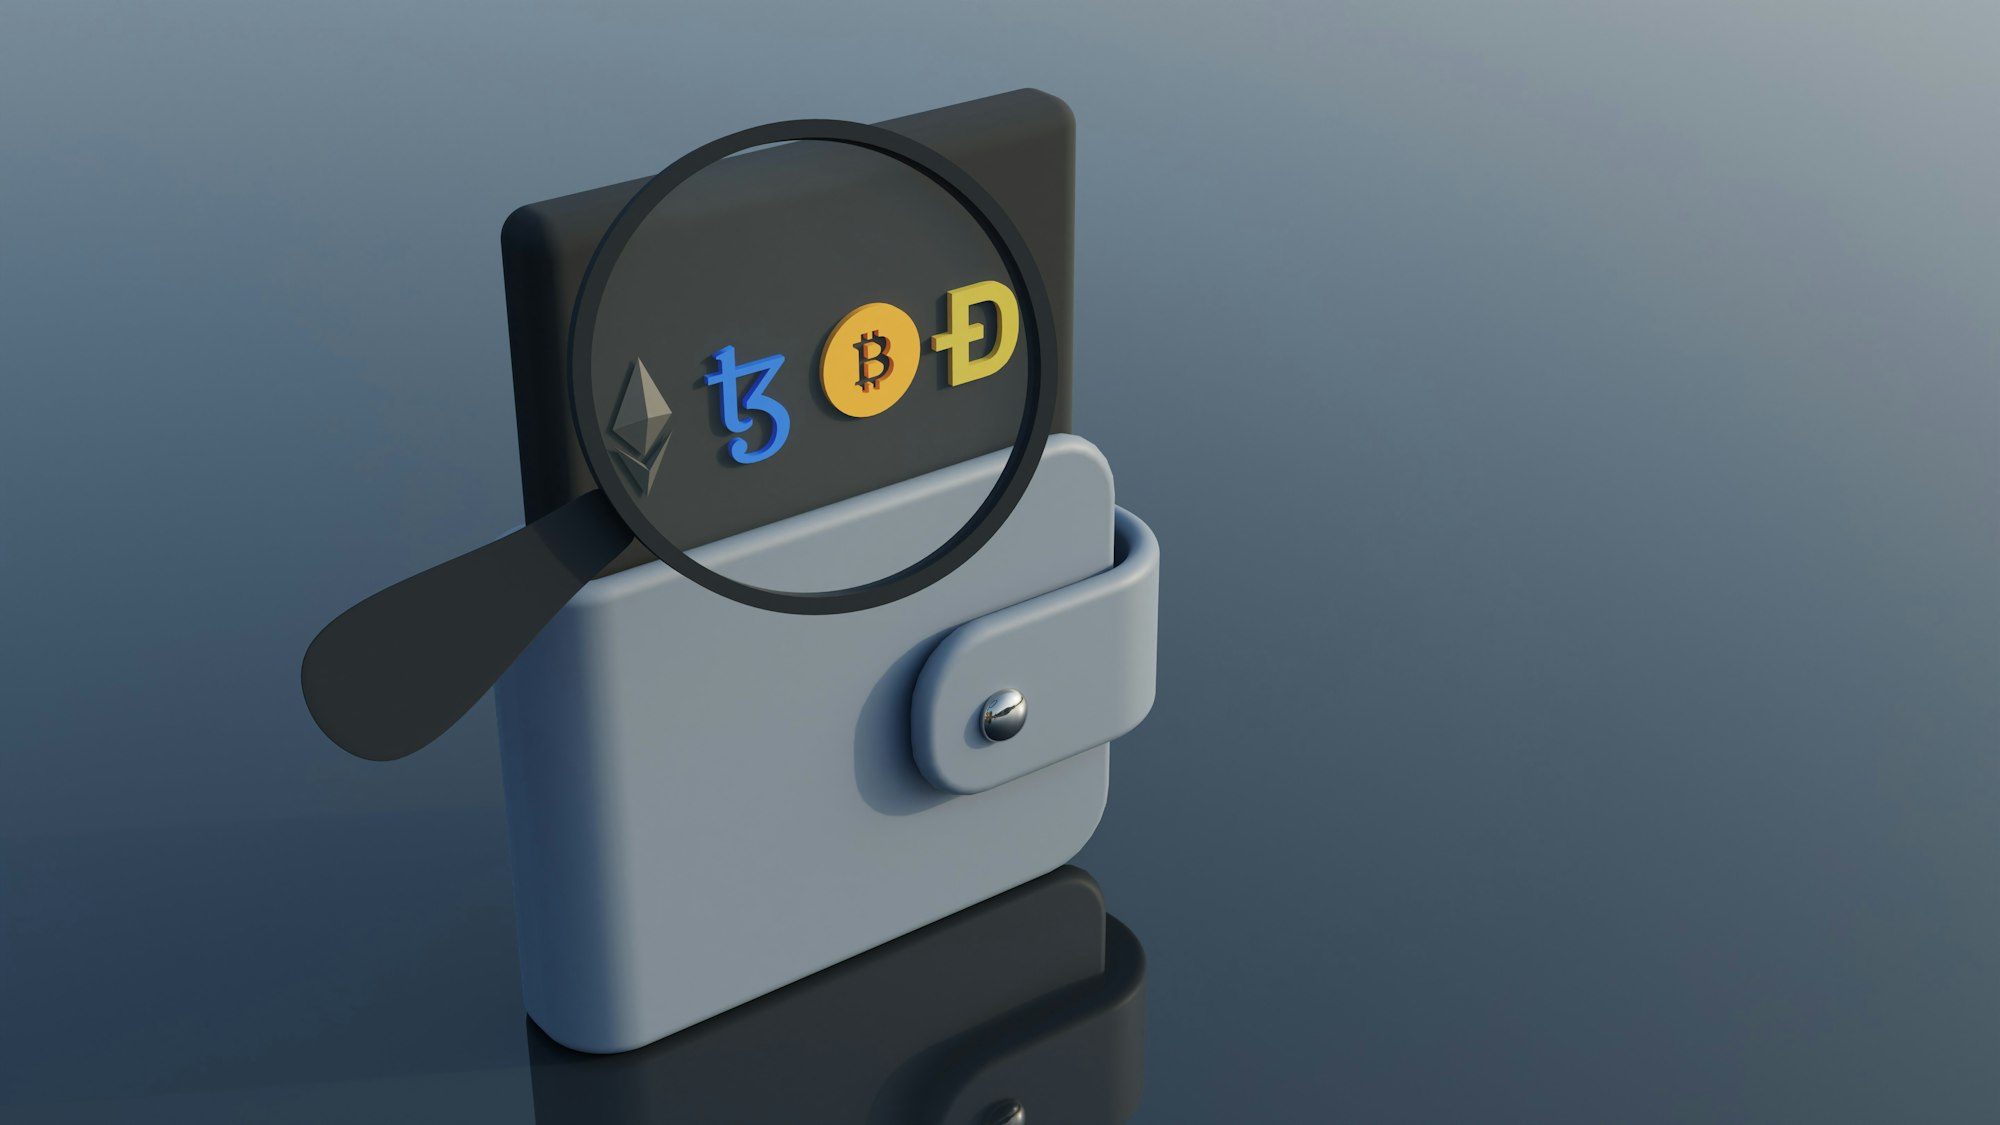 3D illustration of Tezos coin, bitcoin, Ehtereum, and dogecoin stored in a wallet and being scanned.
Tezos is a blockchain designed to evolve.
work 👇: 
 Email: shubhamdhage000@gmail.com